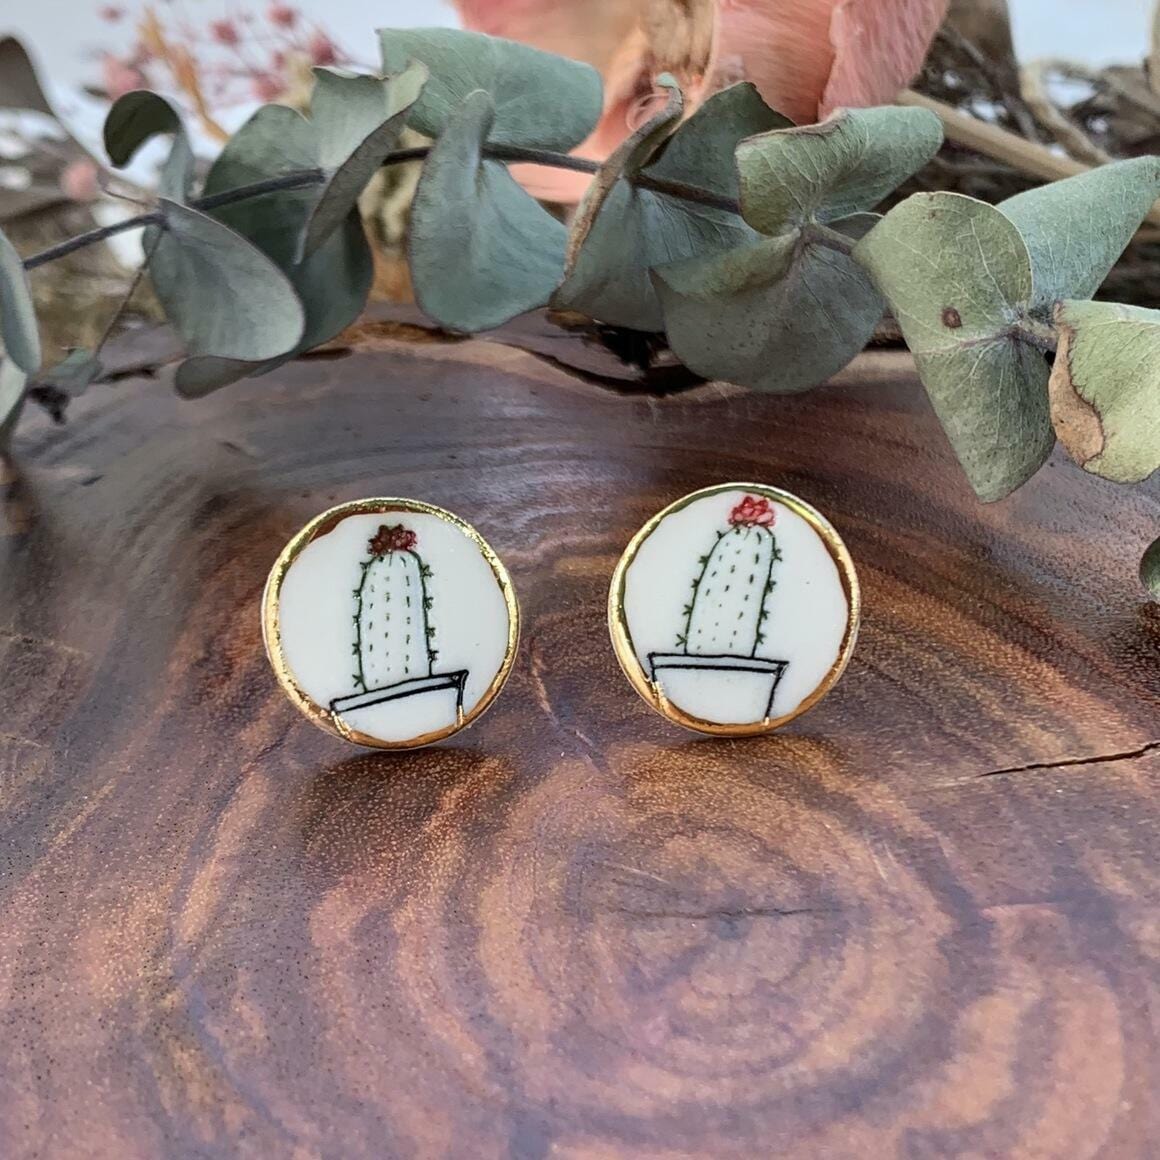 WOLF & CLAY Earrings Cactus 2 Cactus and Succulent Porcelain Stud Earrings